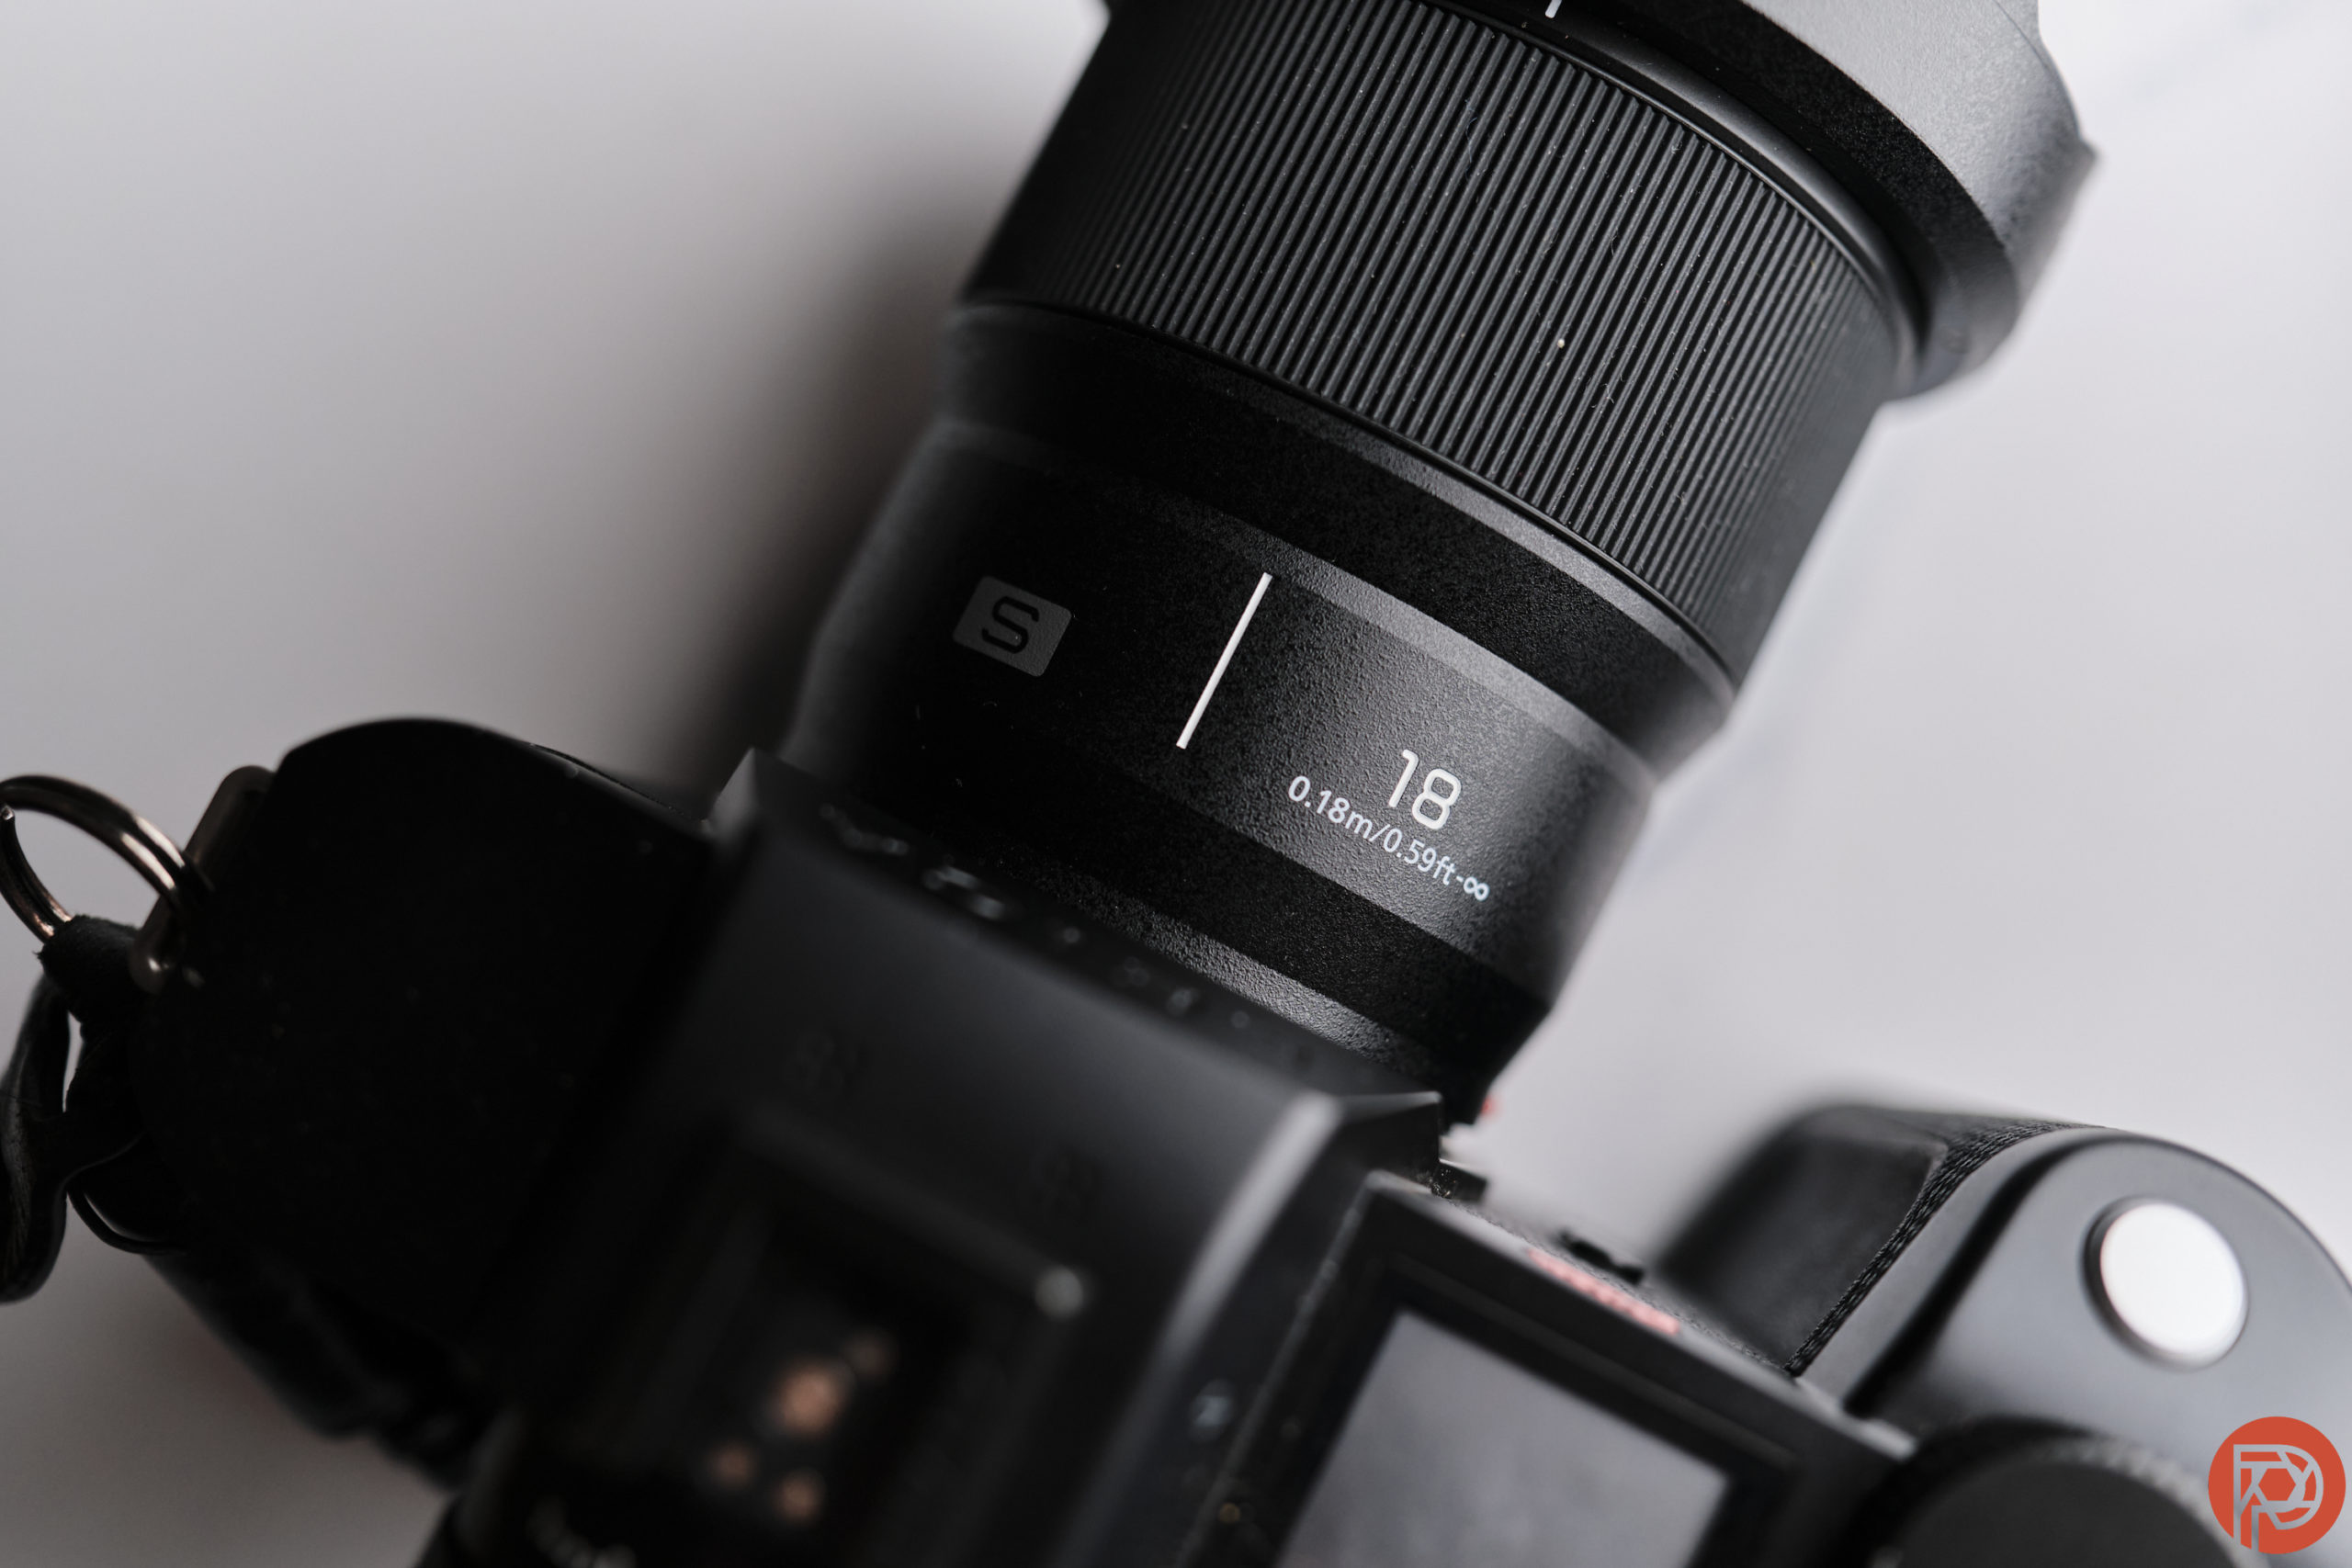 Chris Gampat The Phoblographer Panasonic 18mm f1.8 product images review 21-400s400